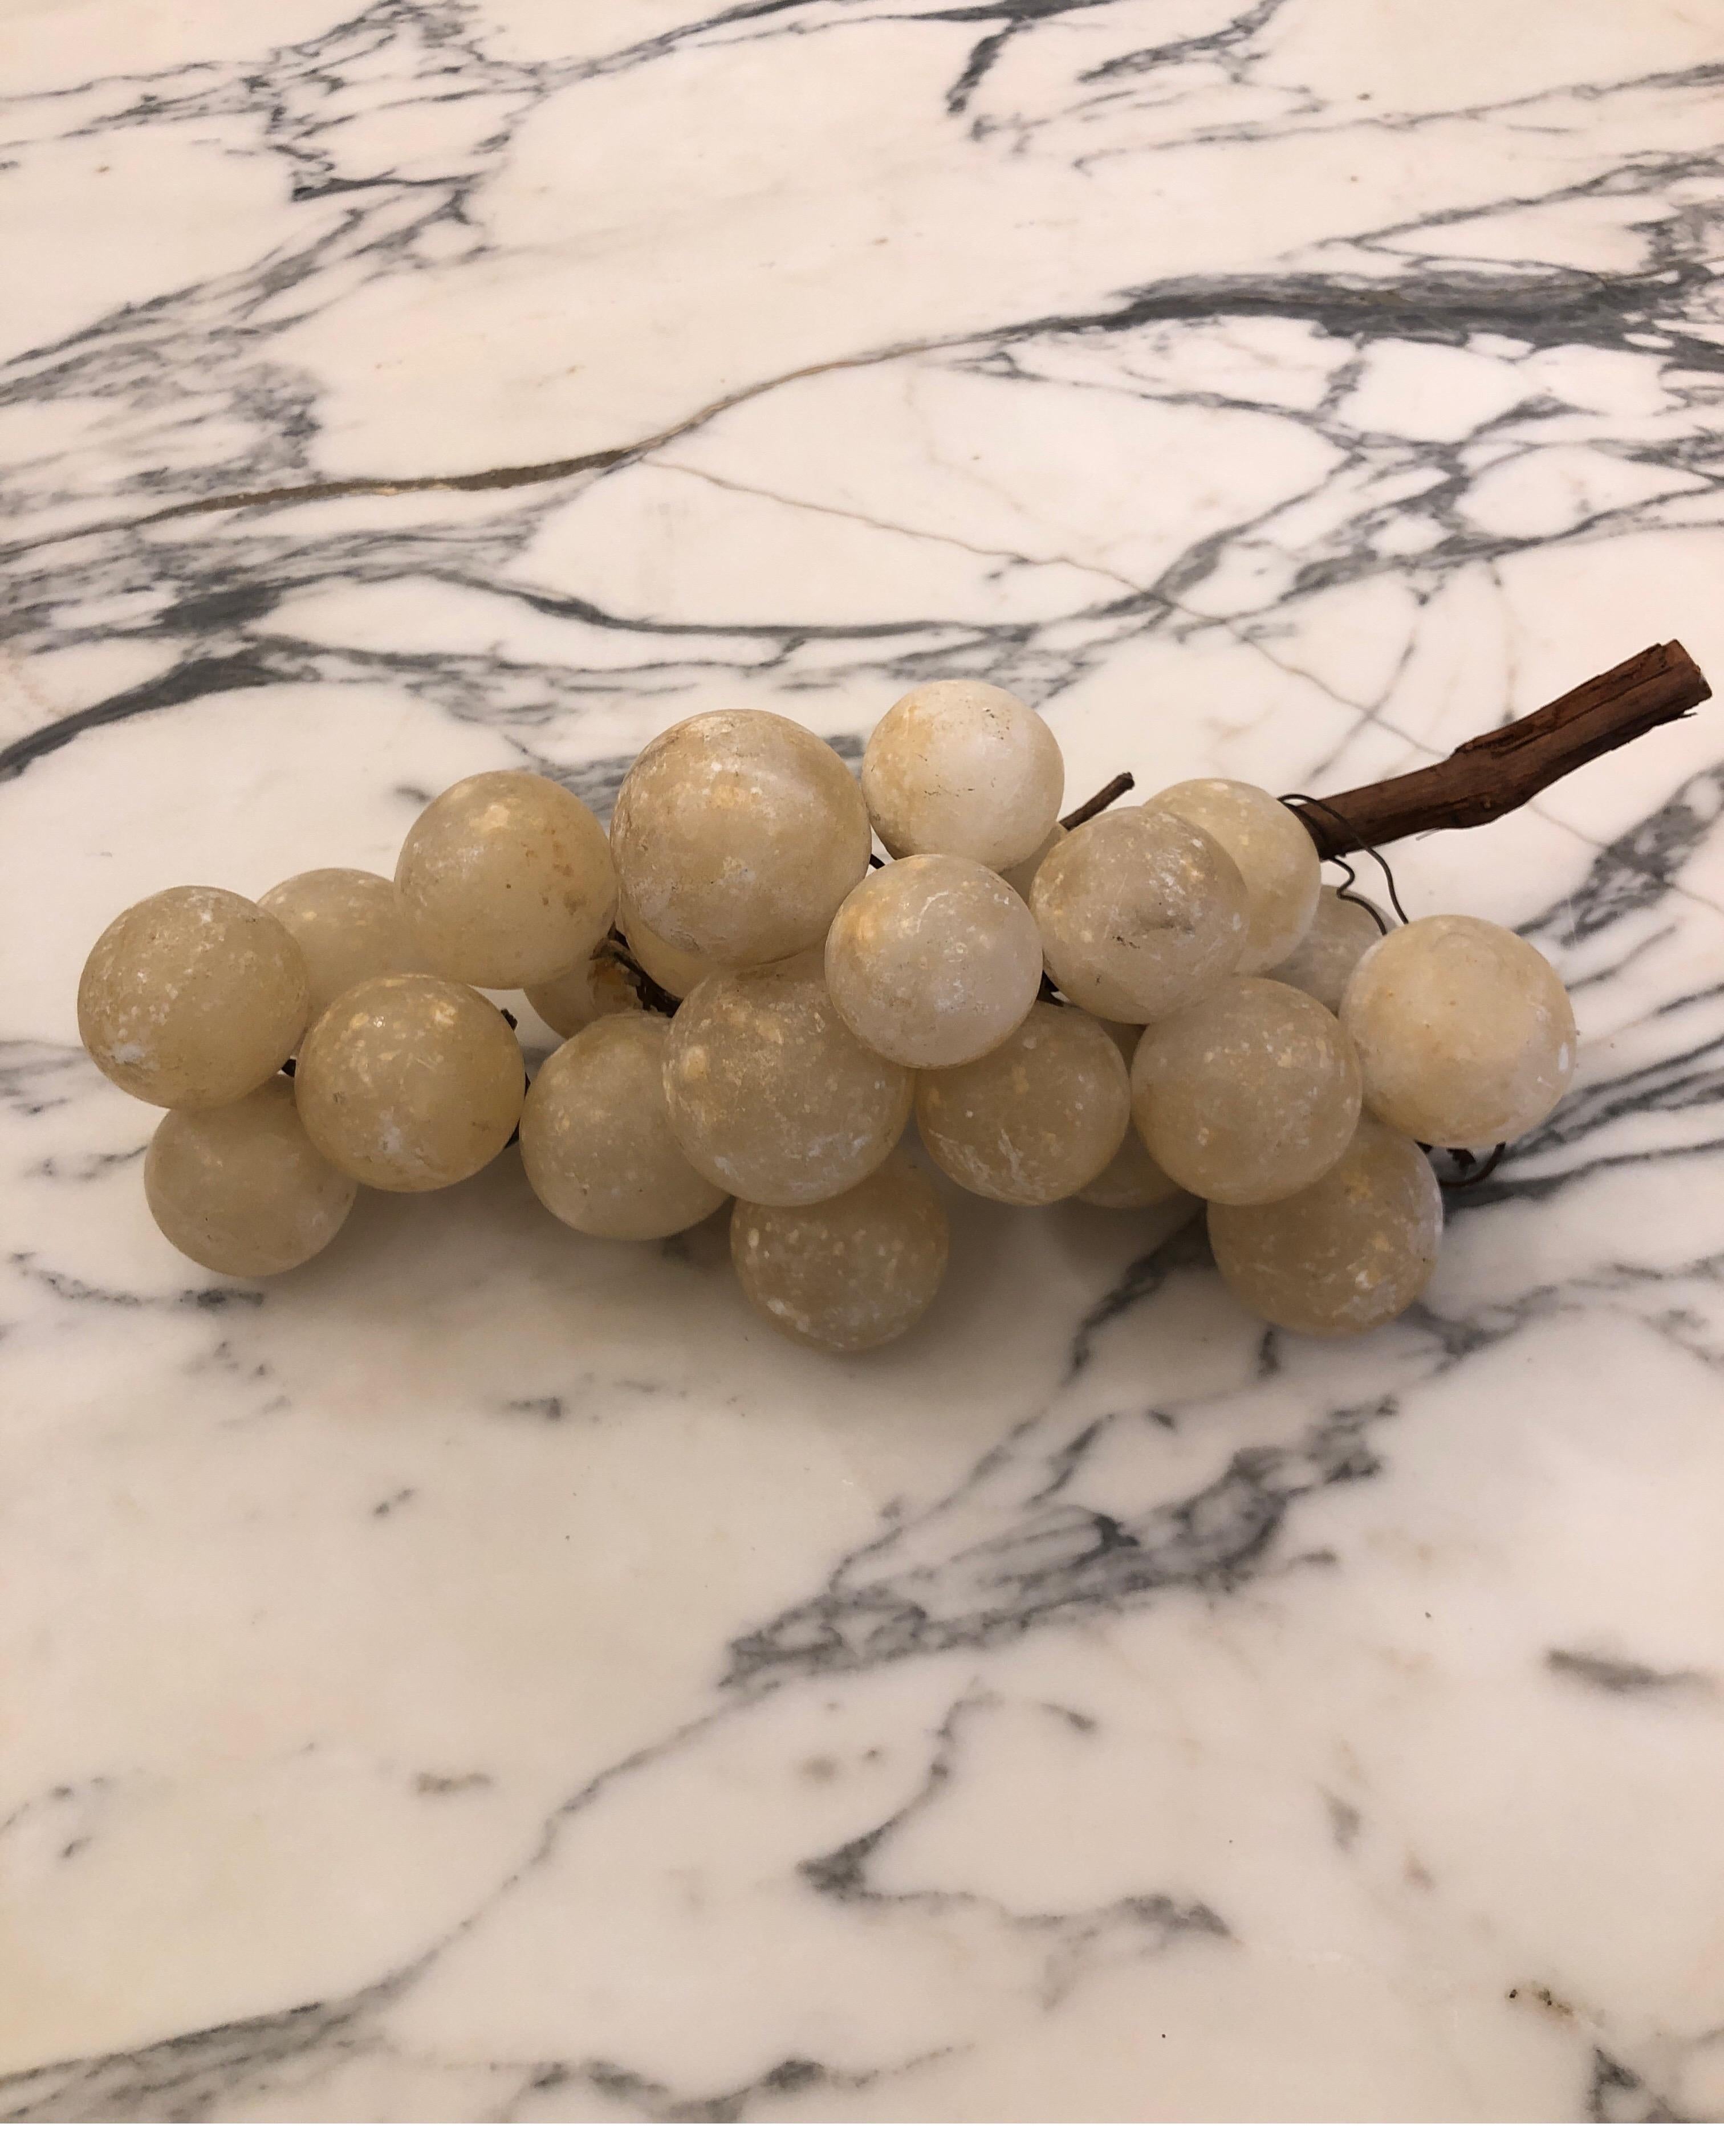 Large cluster of grapes made of aged ivory white marble. Two different clusters attached to one branch.